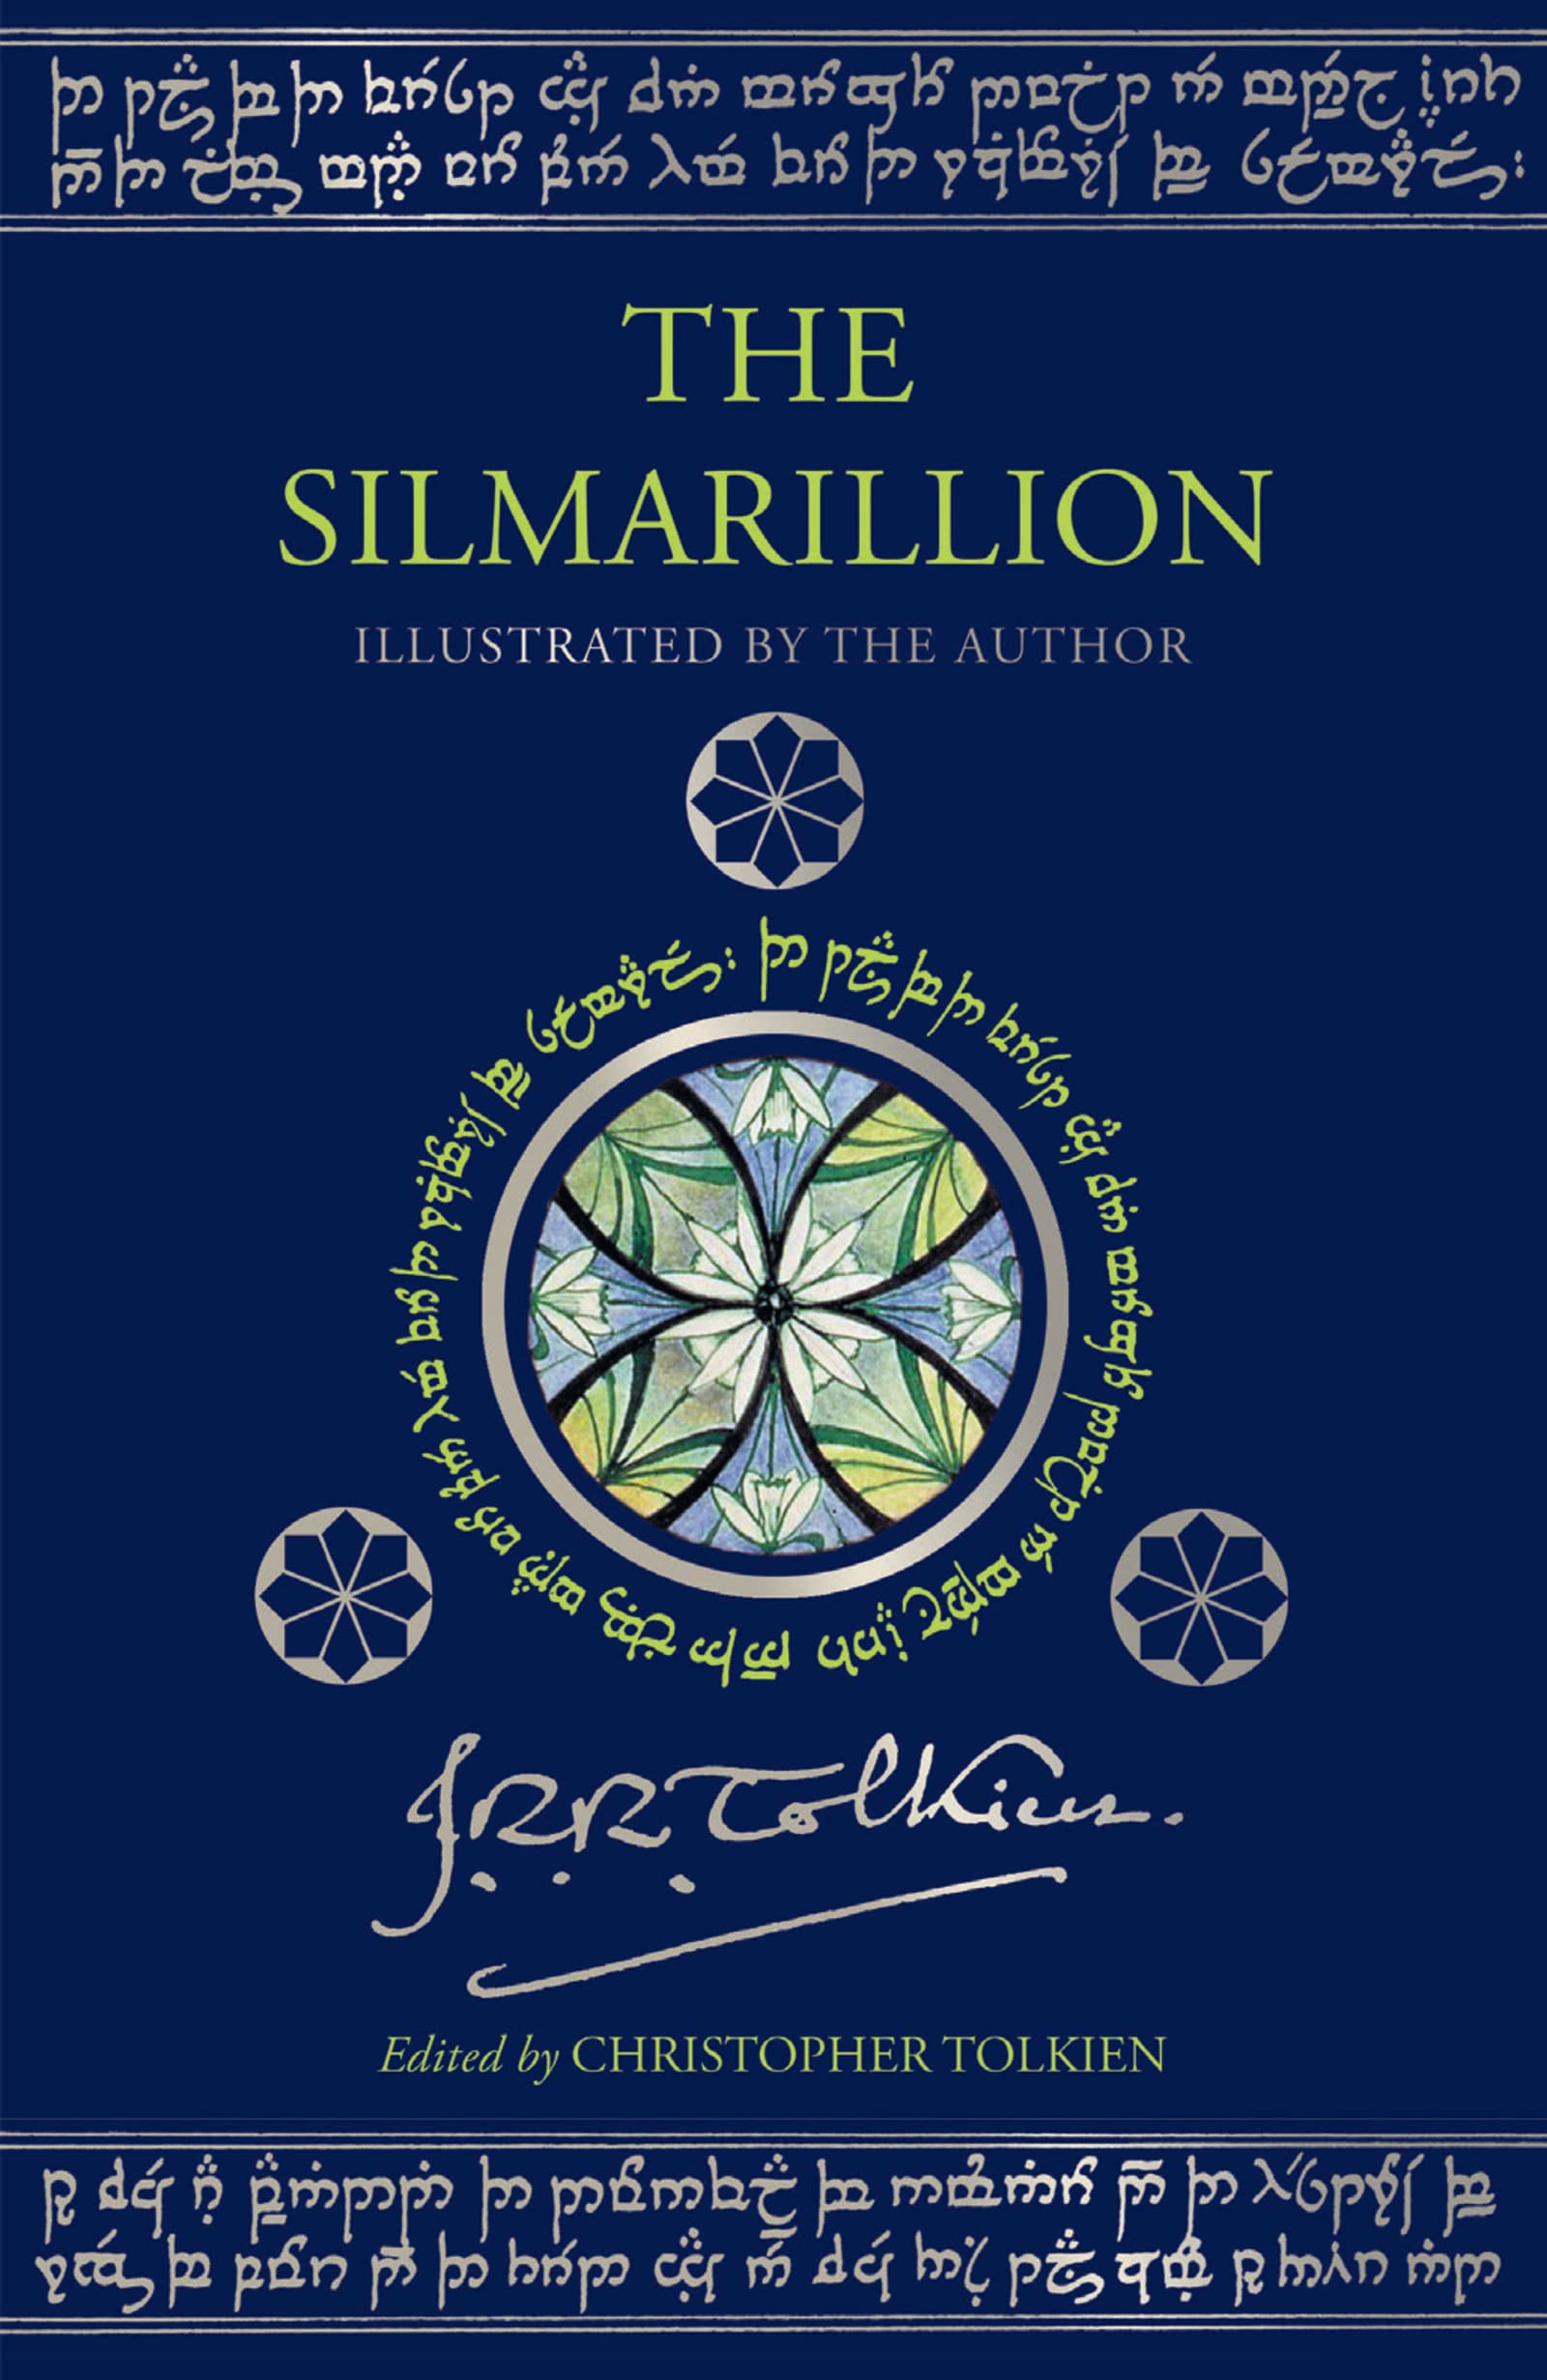 The Silmarillion [Illustrated Edition] : Illustrated by J.R.R. Tolkien